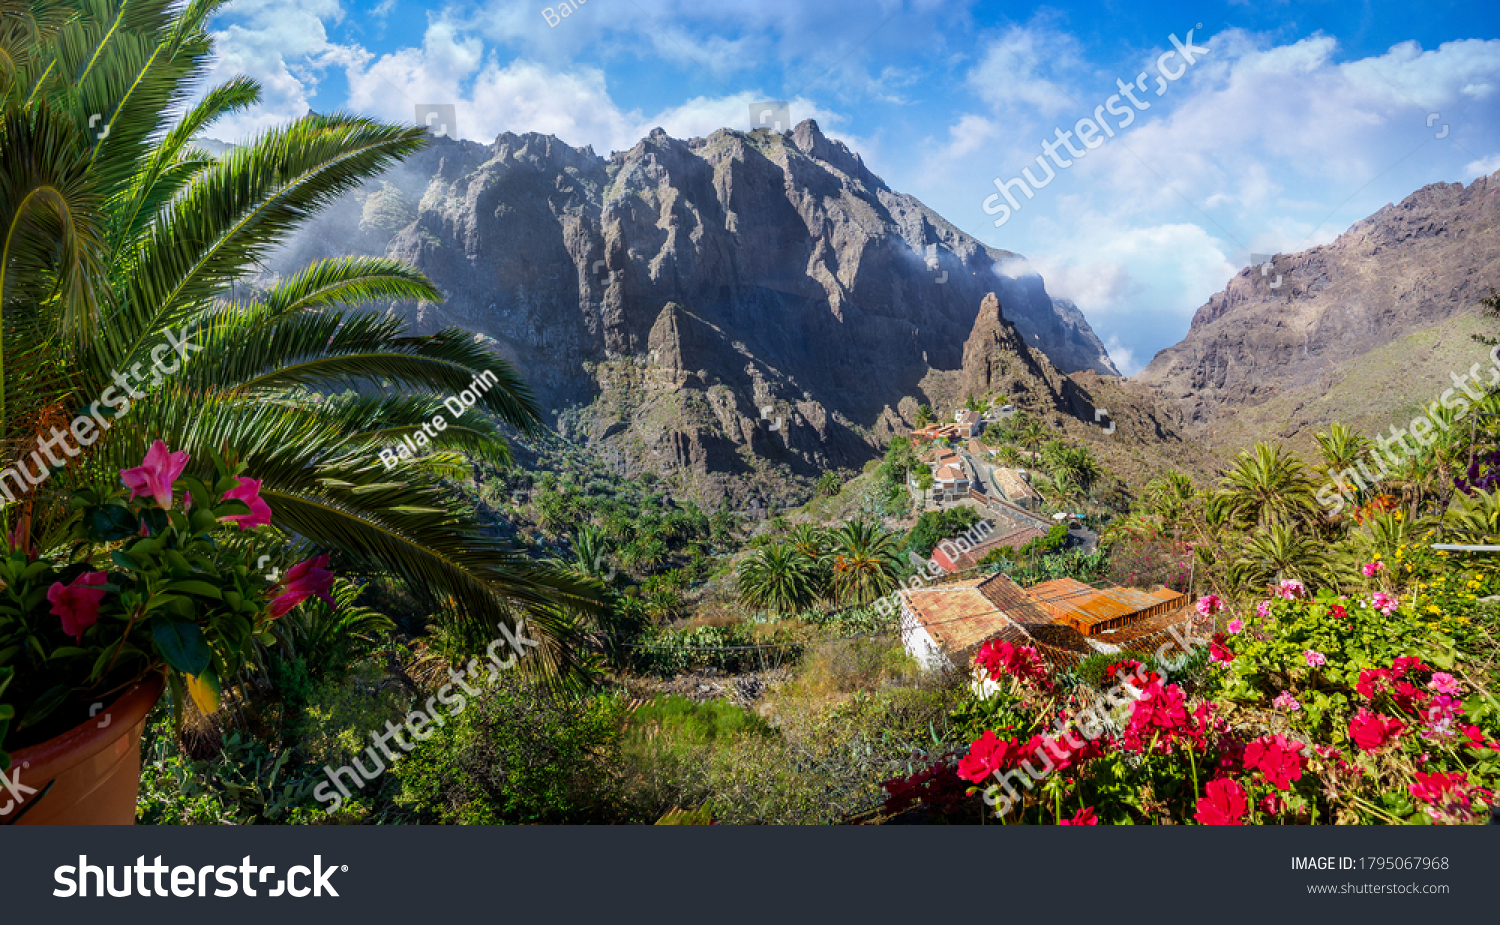 Masca village, the most visited tourist attraction of Tenerife, Spain #1795067968